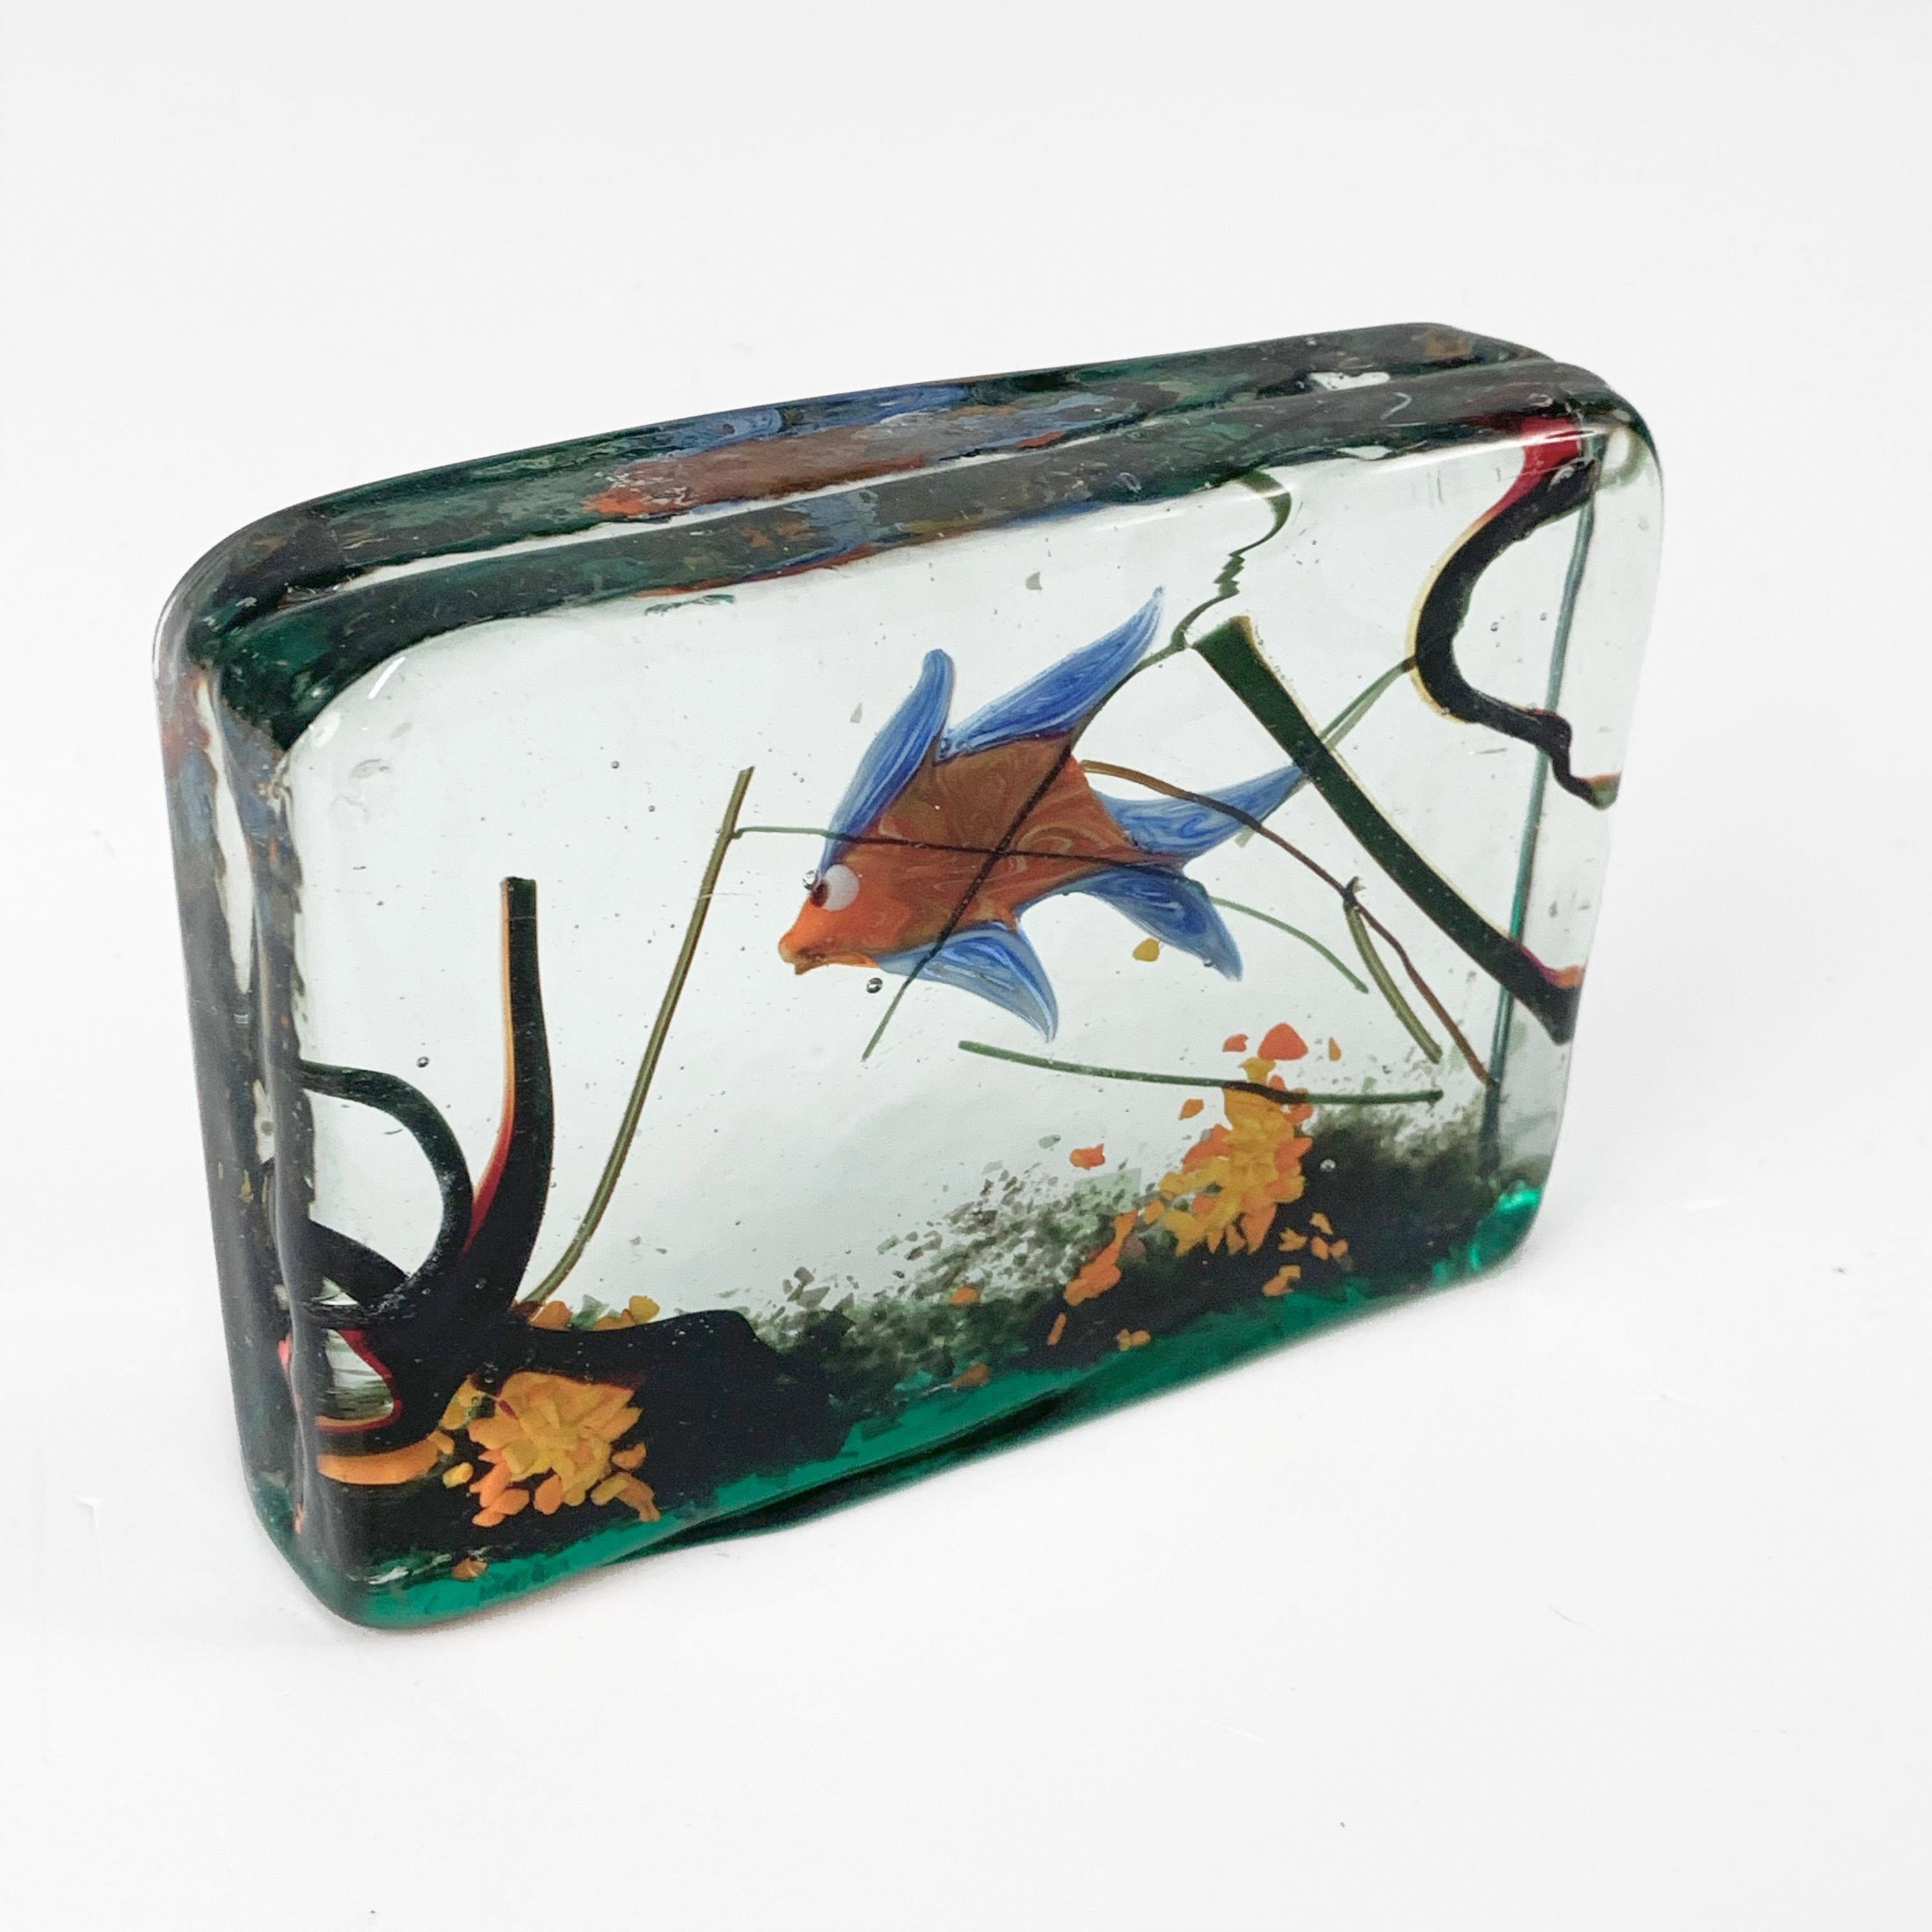 Wonderful sculpture of an aquarium tank with a red and blue fish, with highly artistic details in blown Murano glass. 

Attributed to the artist Alfredo Barbini for Cenedese company. A wonderful addition for decorating a midcentury living room or